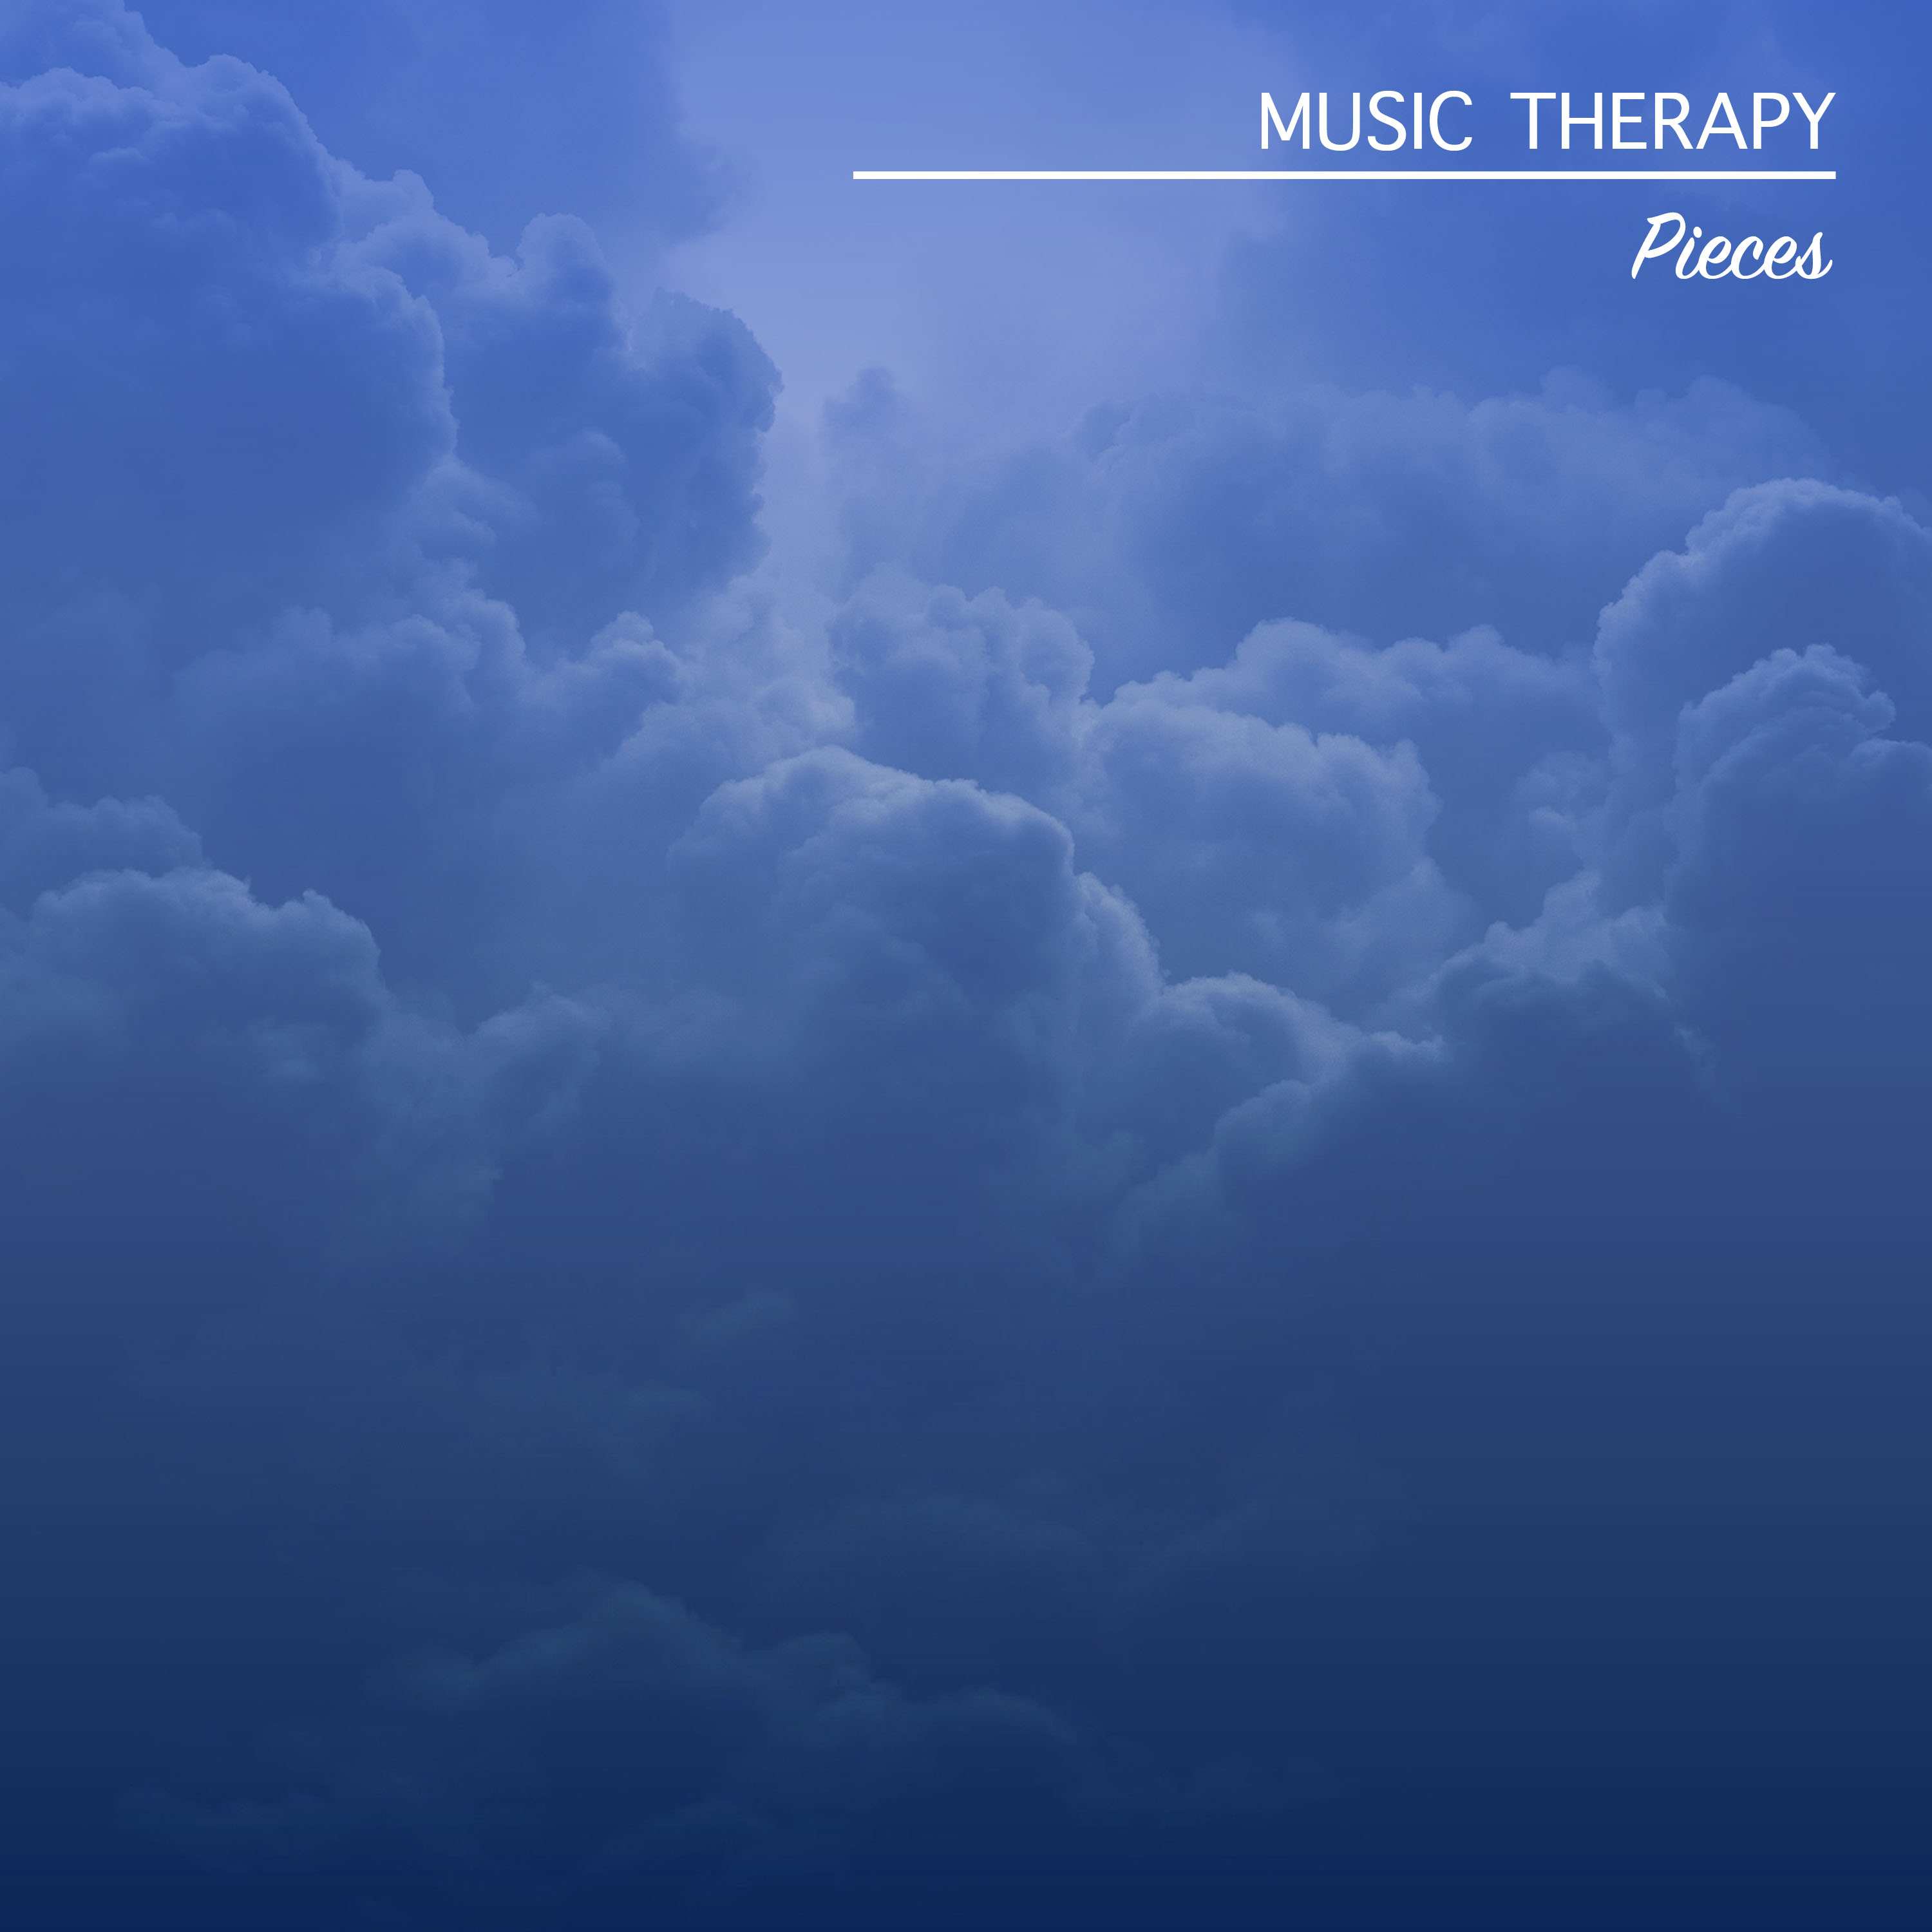 12 Music Therapy Pieces